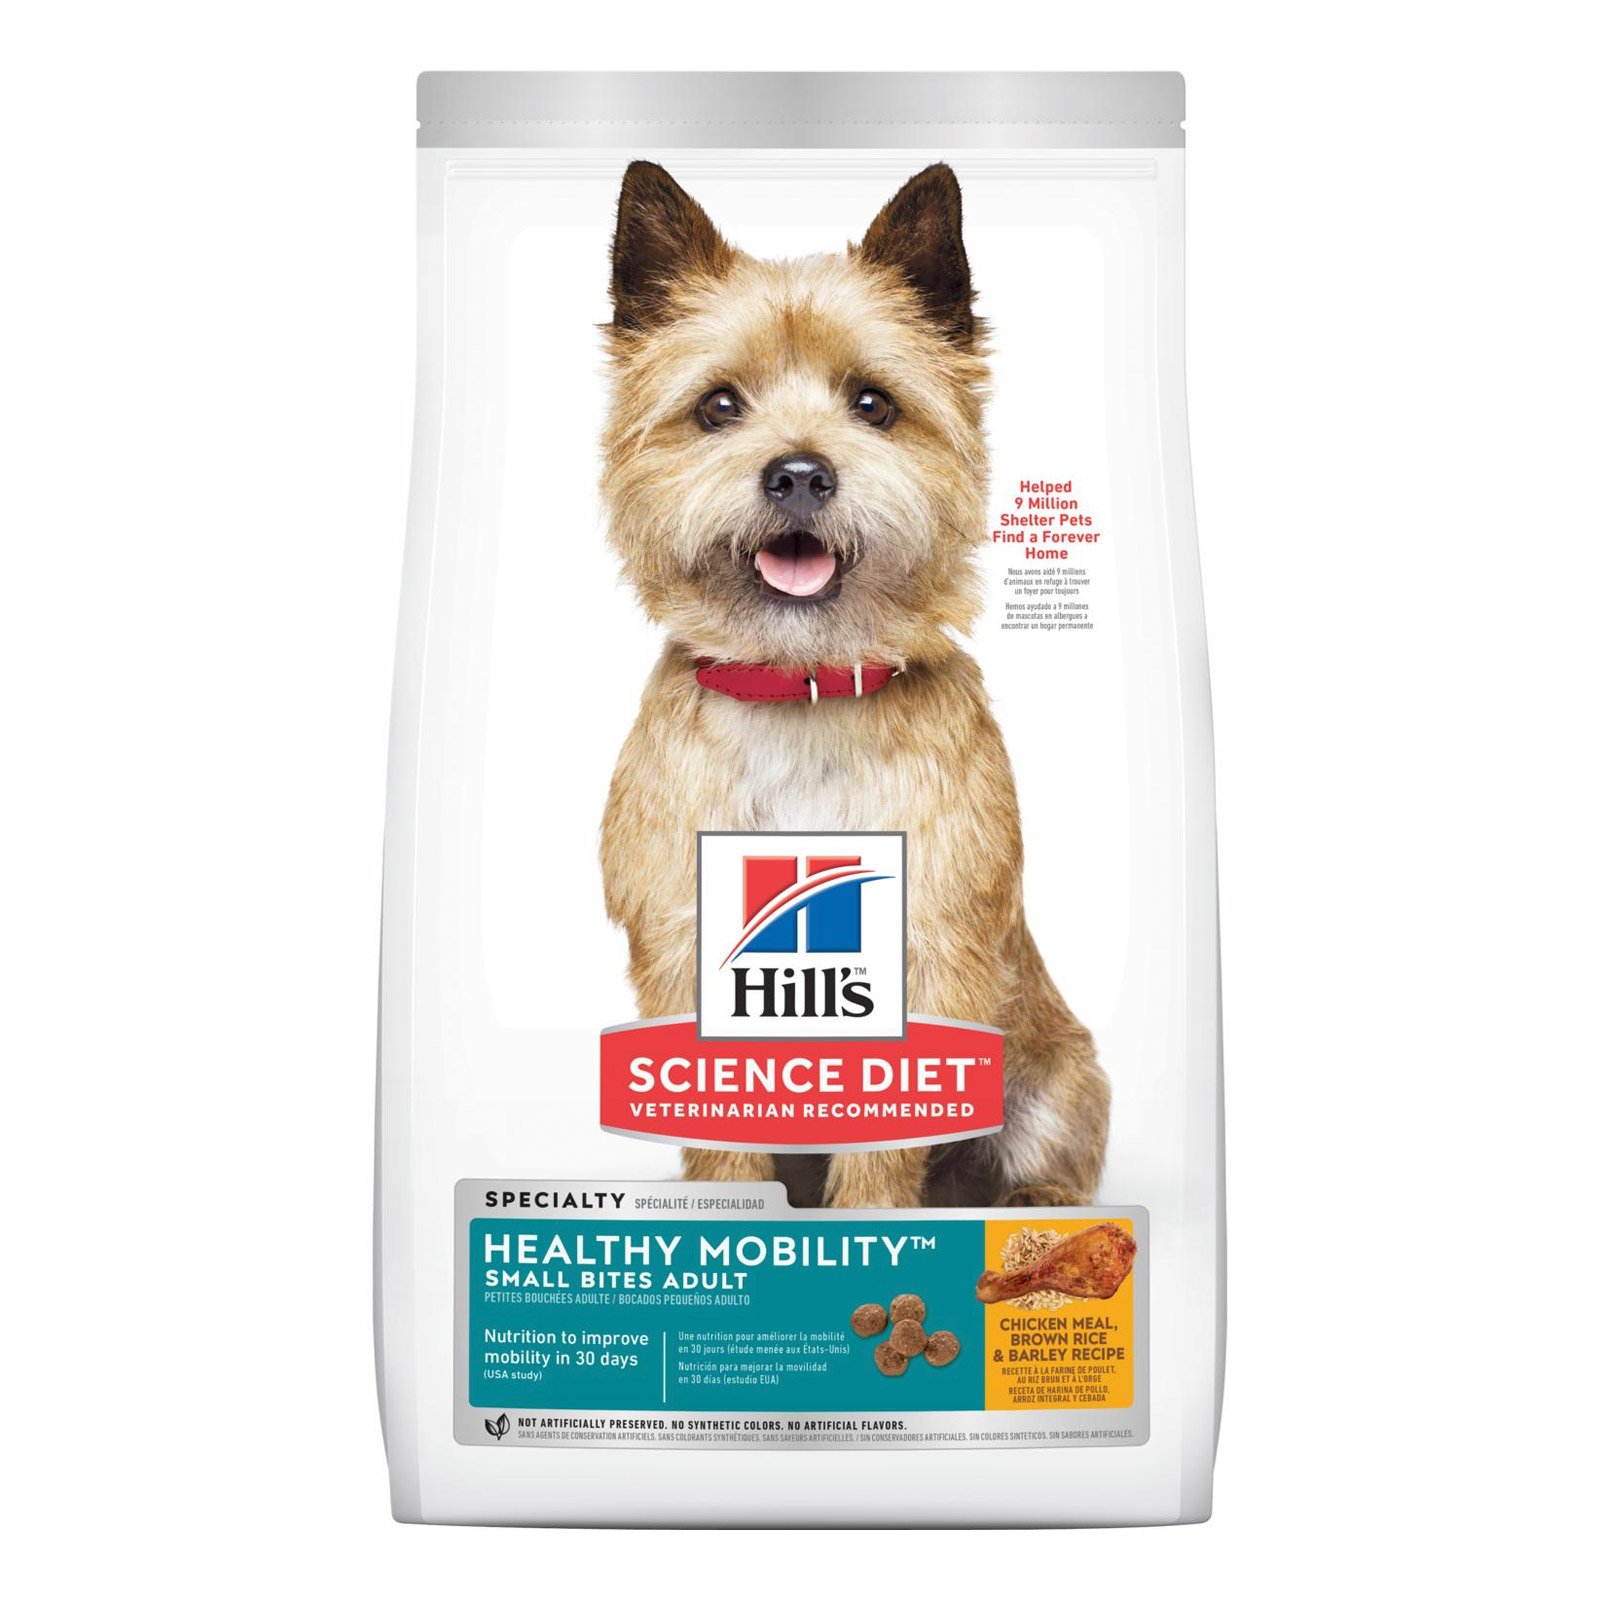 Hill's Science Diet Adult Healthy Mobility Small Bites Dog Food 1.8 Kg